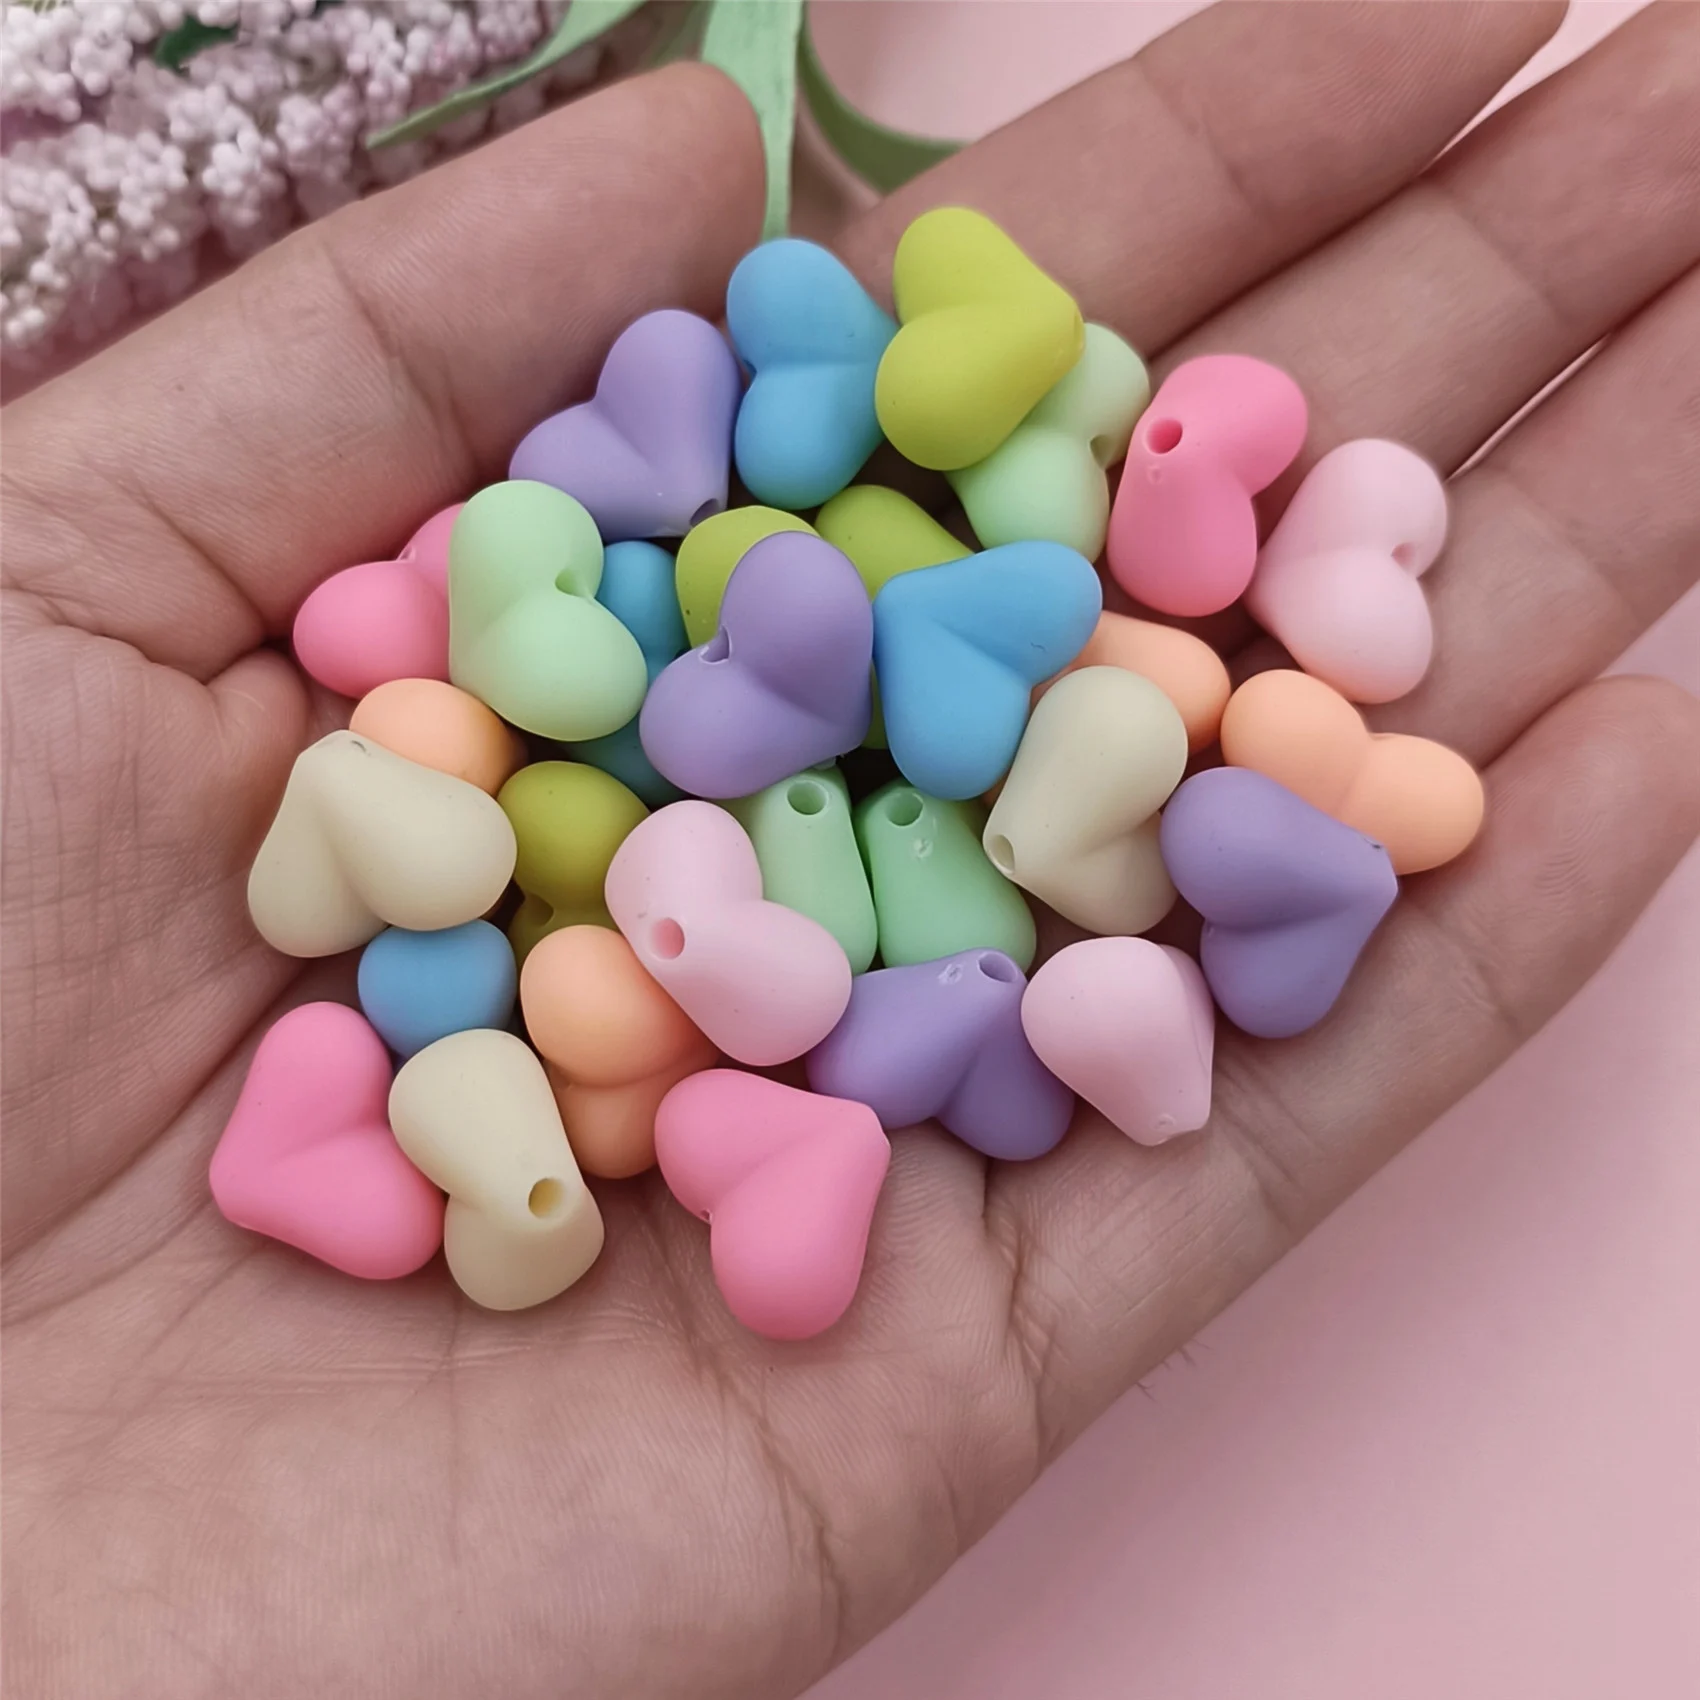 

15x11mm 30Pcs Solid Color Love Heart Beads For Jewelry Making DIY Bracelet Neckalce Phone Chain Creative Handmade Materials